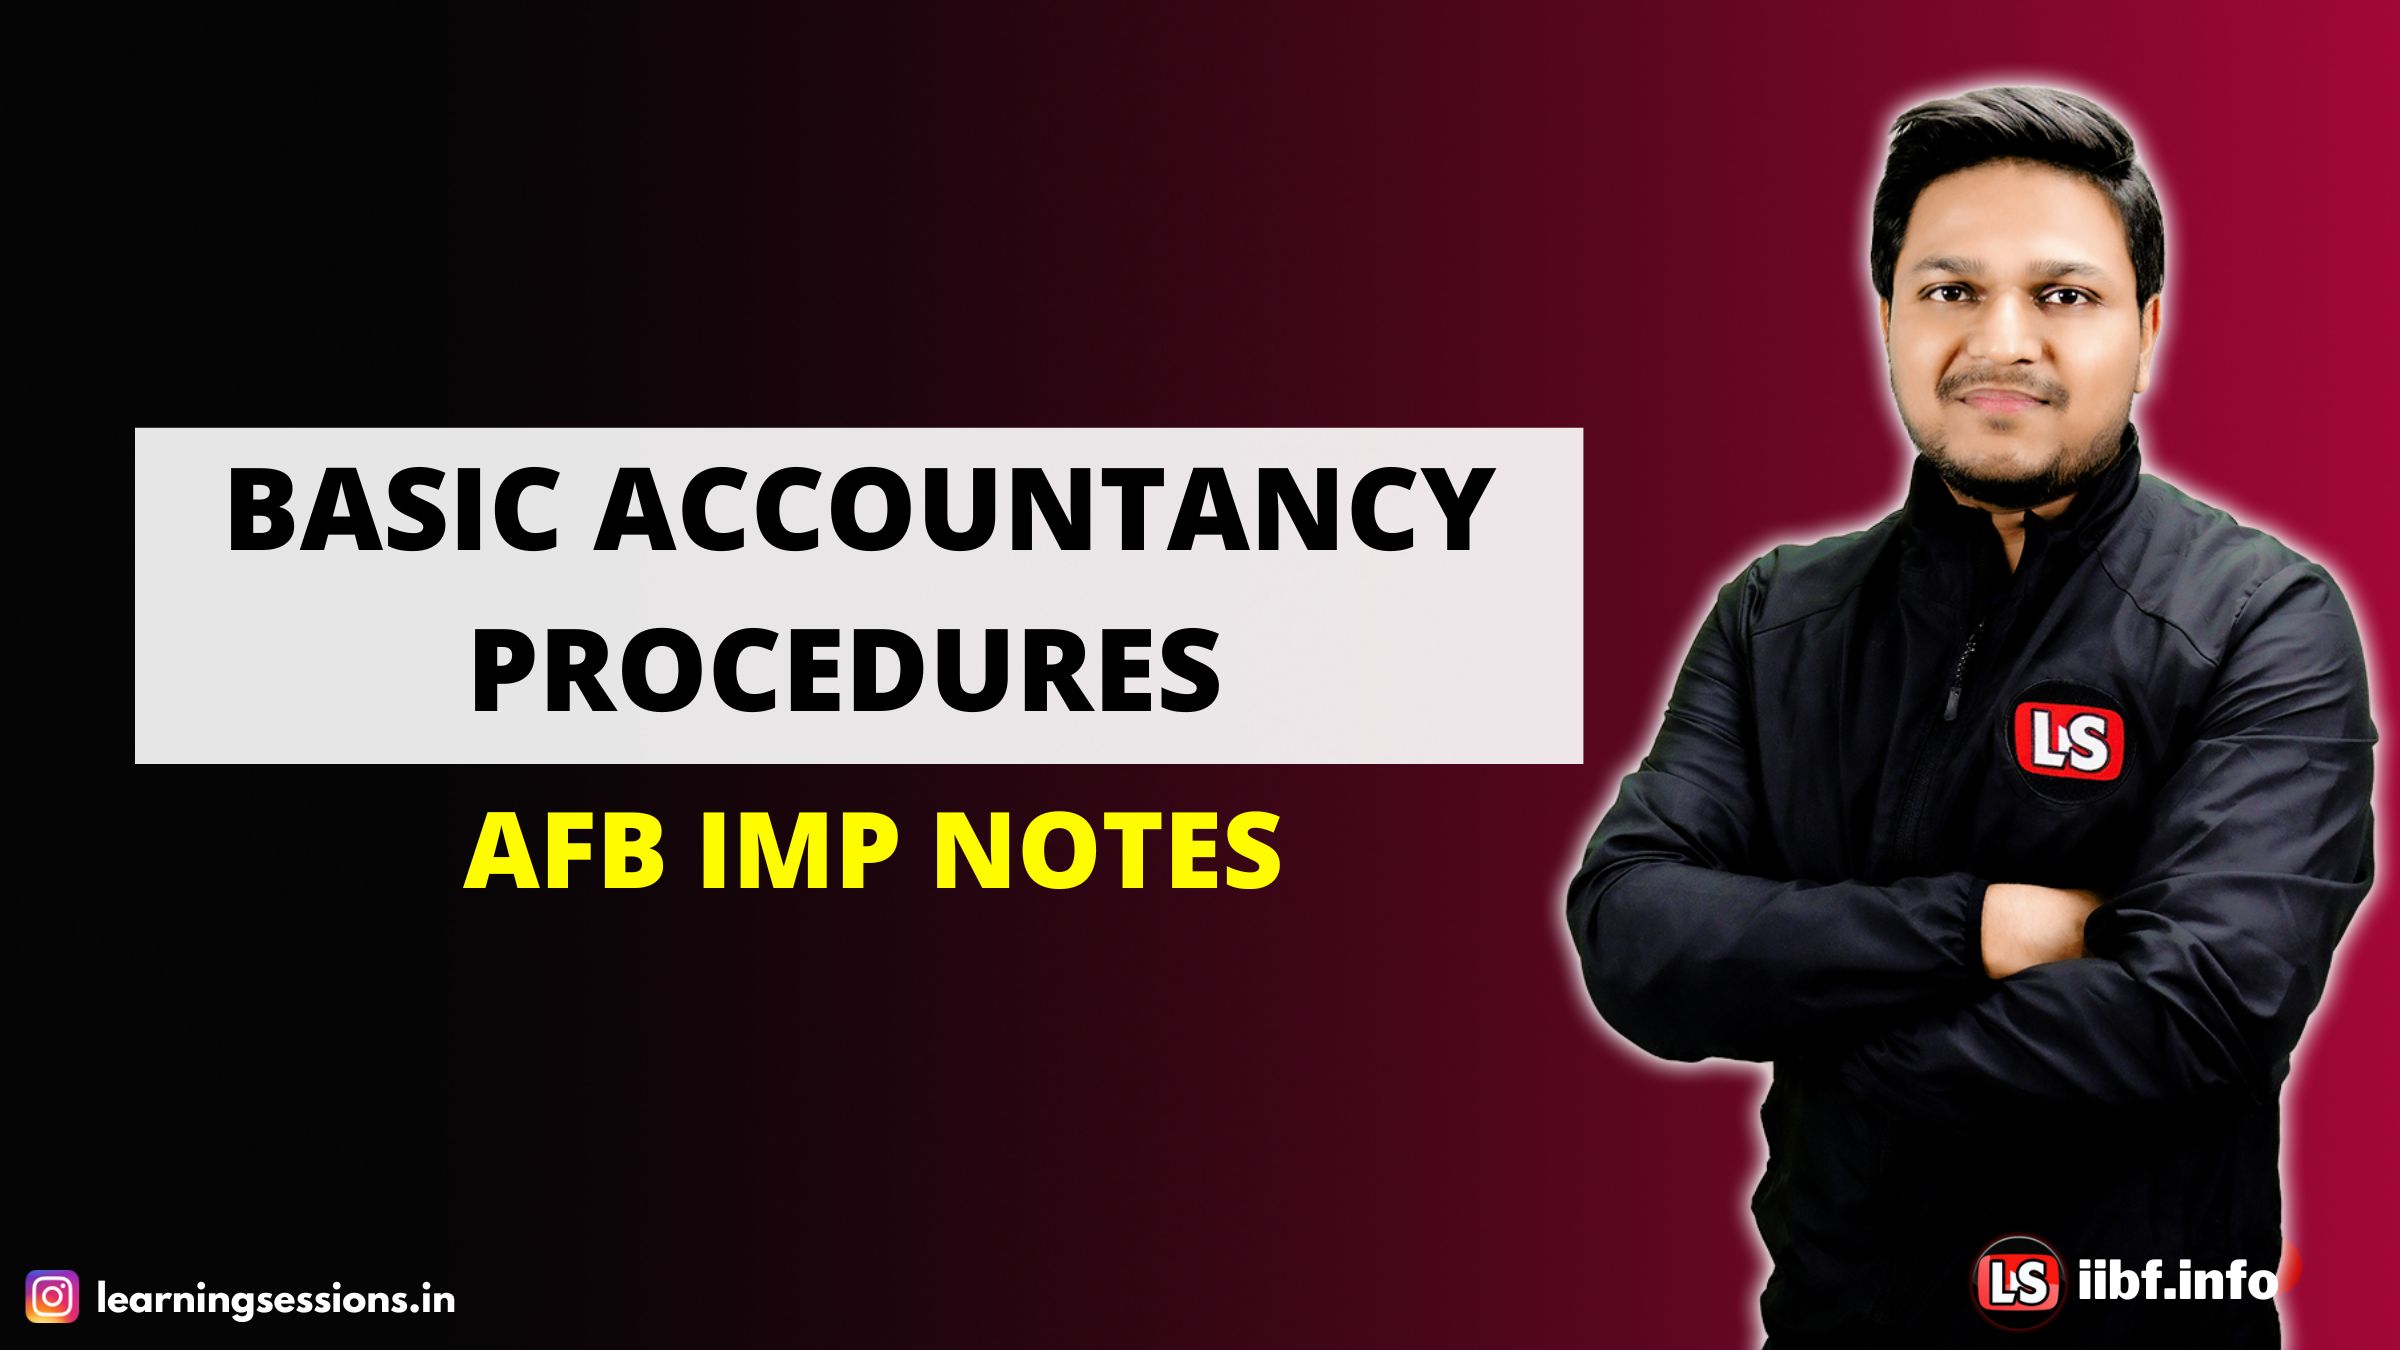 AFB EASY NOTES TO PASS JAIIB | BASIC ACCOUNTANCY PROCEDURES | ONLINE CLASSES 2022